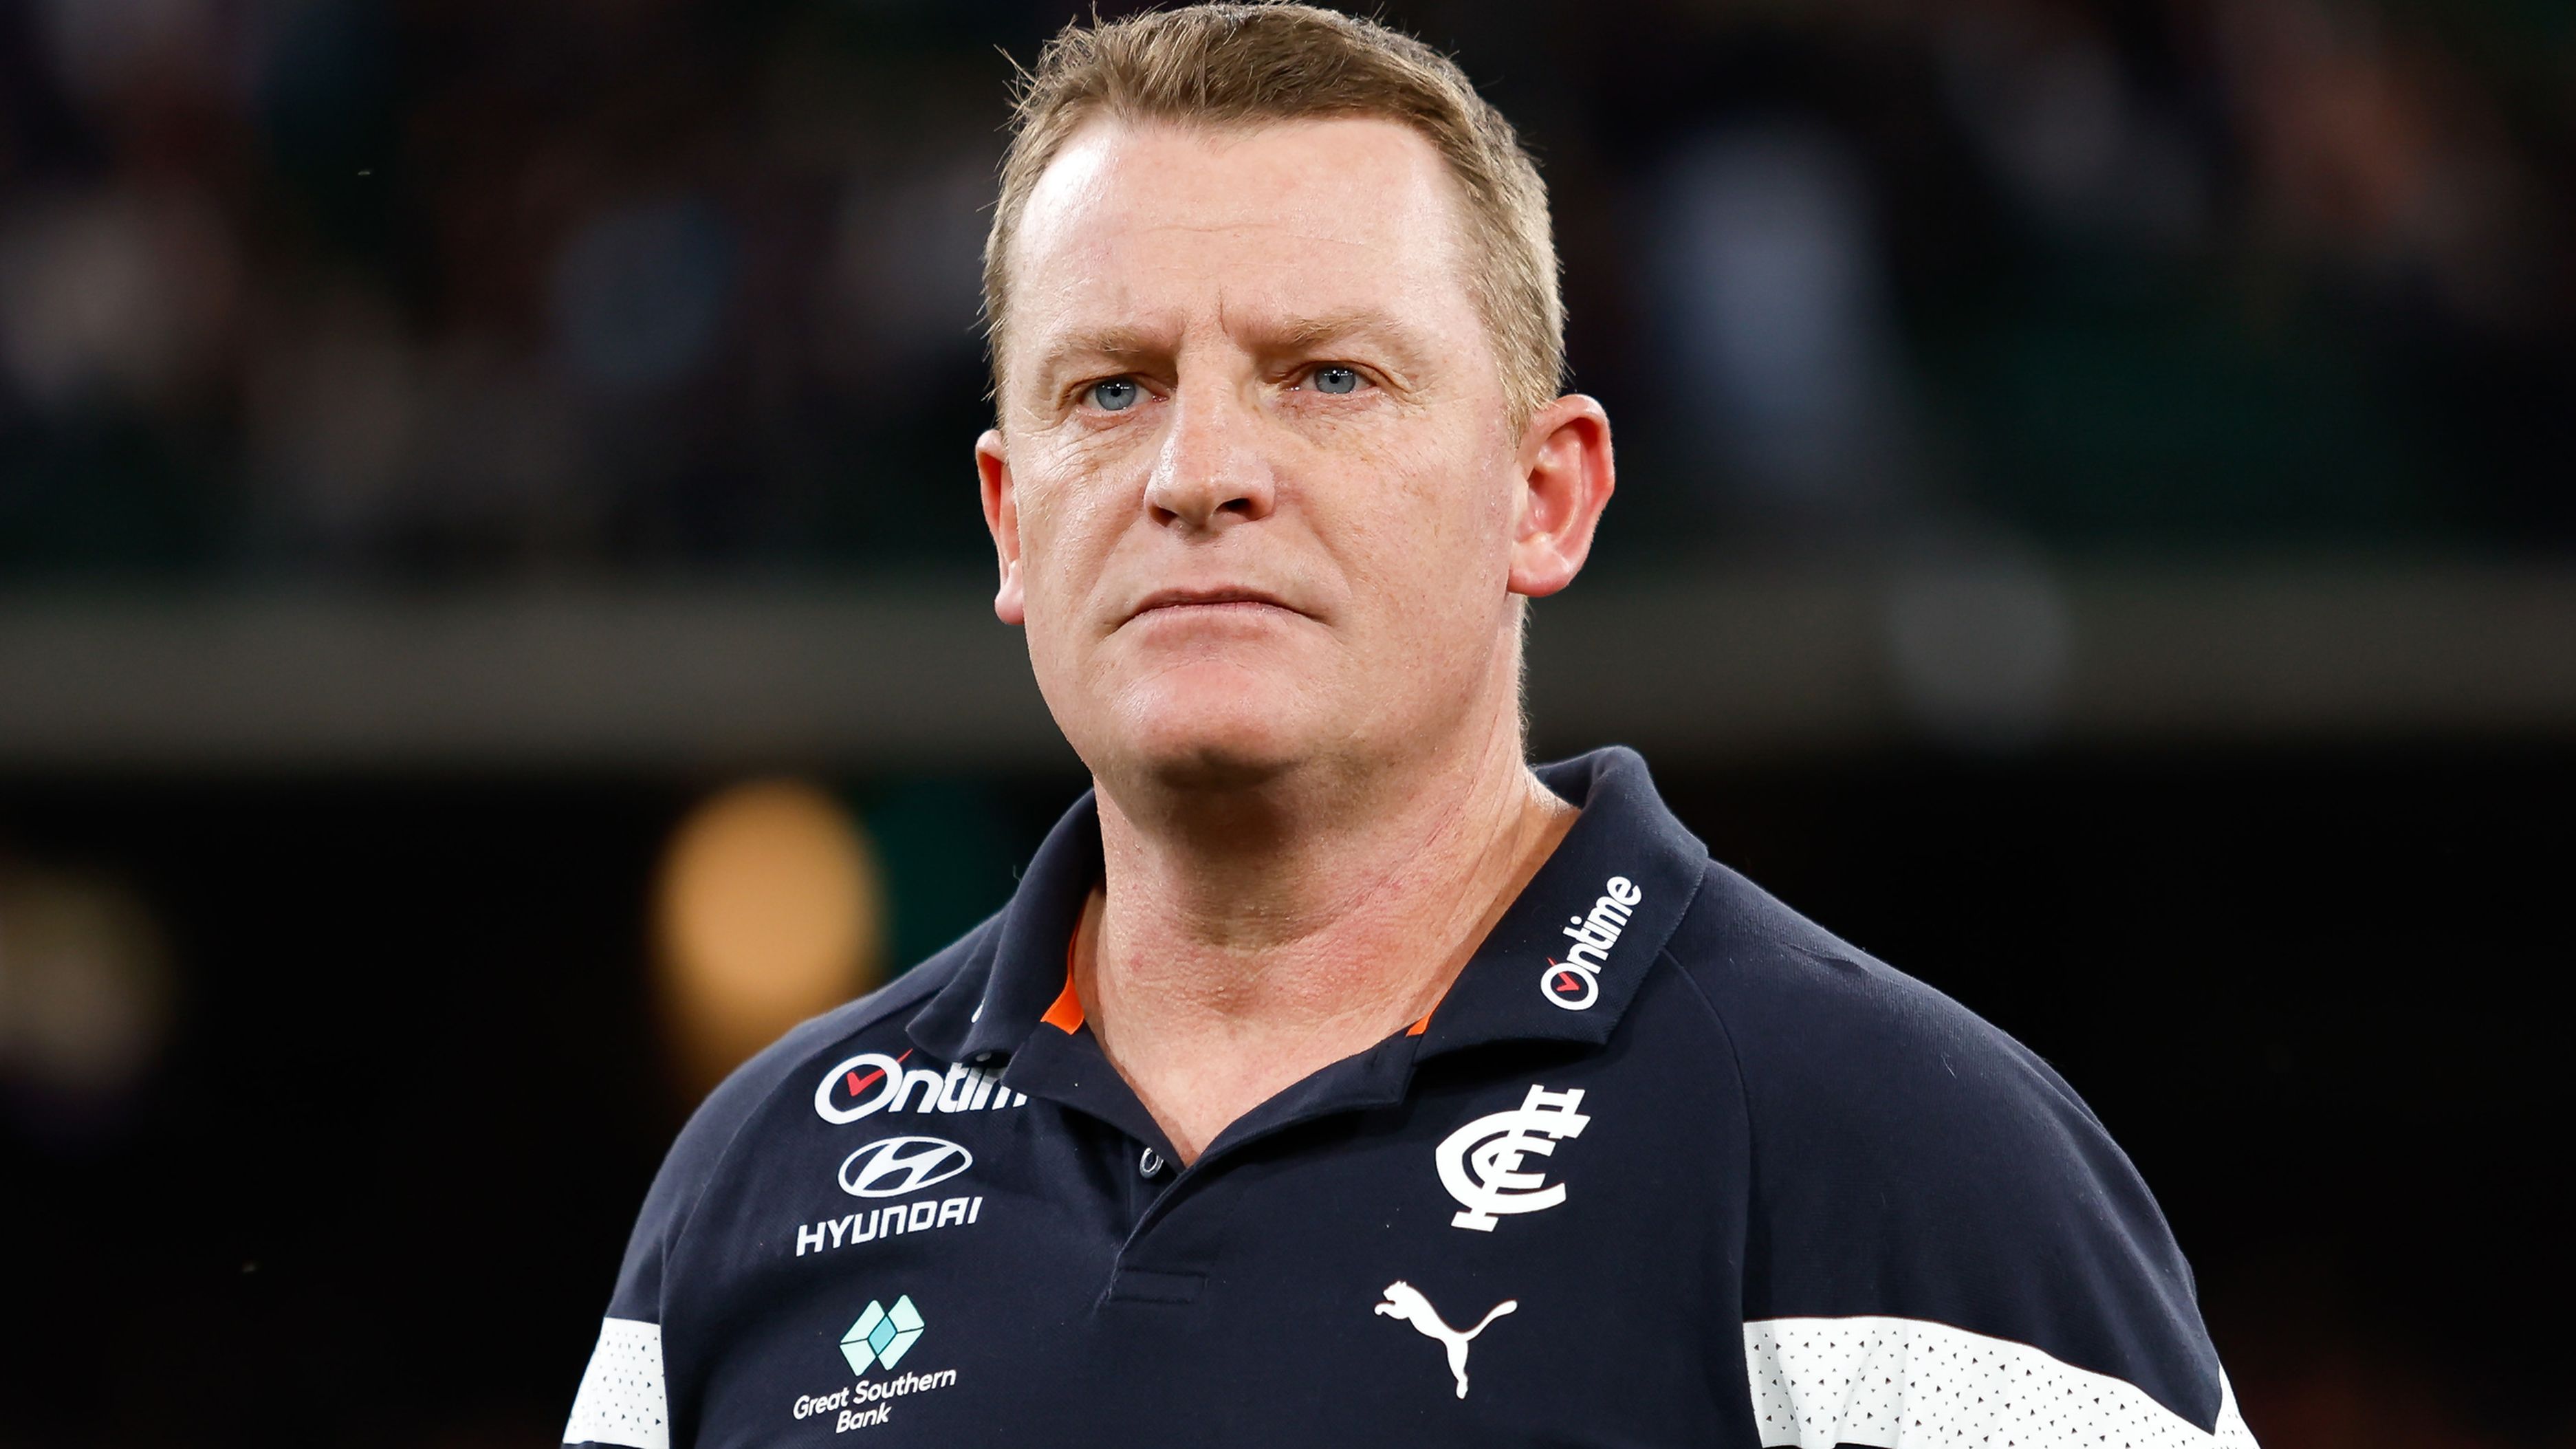 Carlton coach Michael Voss raises eyebrows by axing fan-favourite ahead of preliminary final